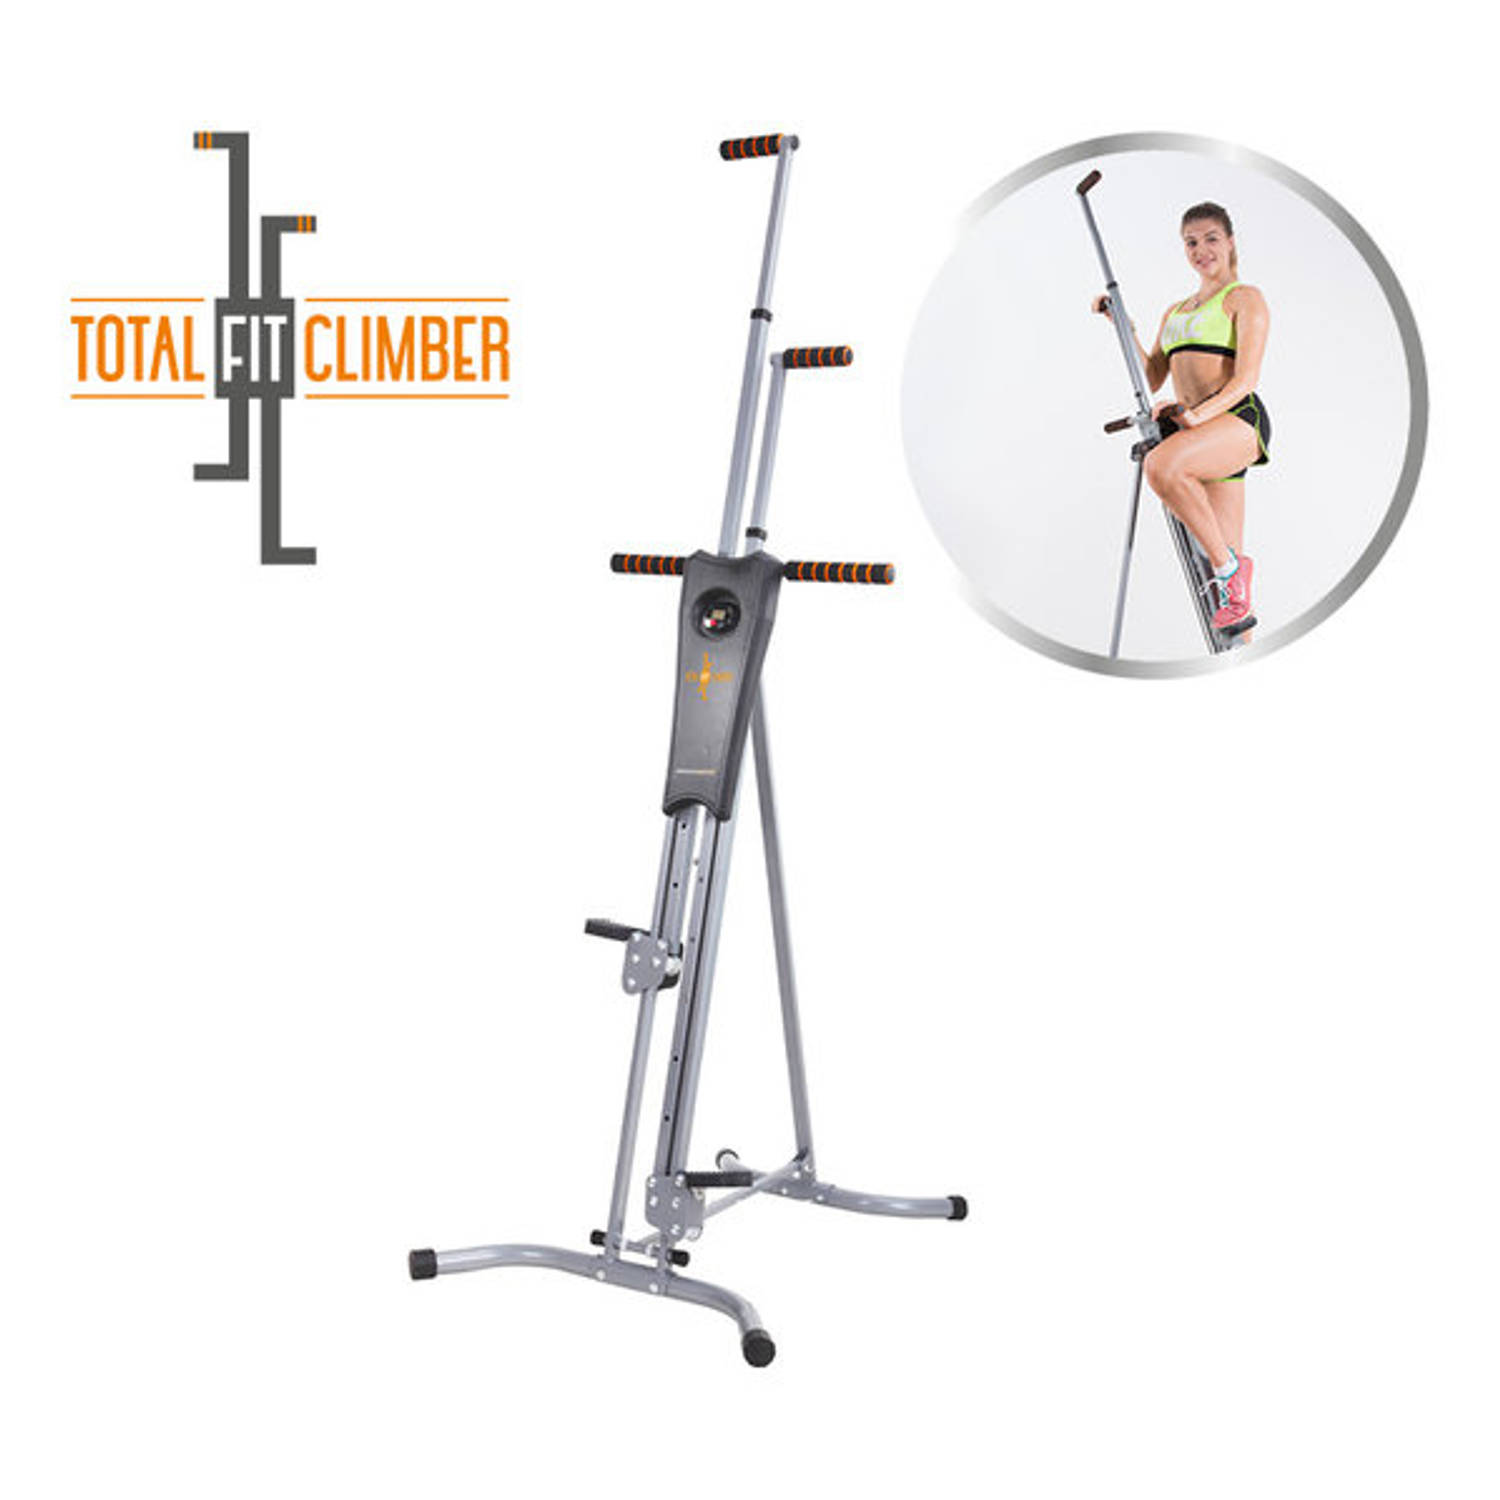 Total fit climber